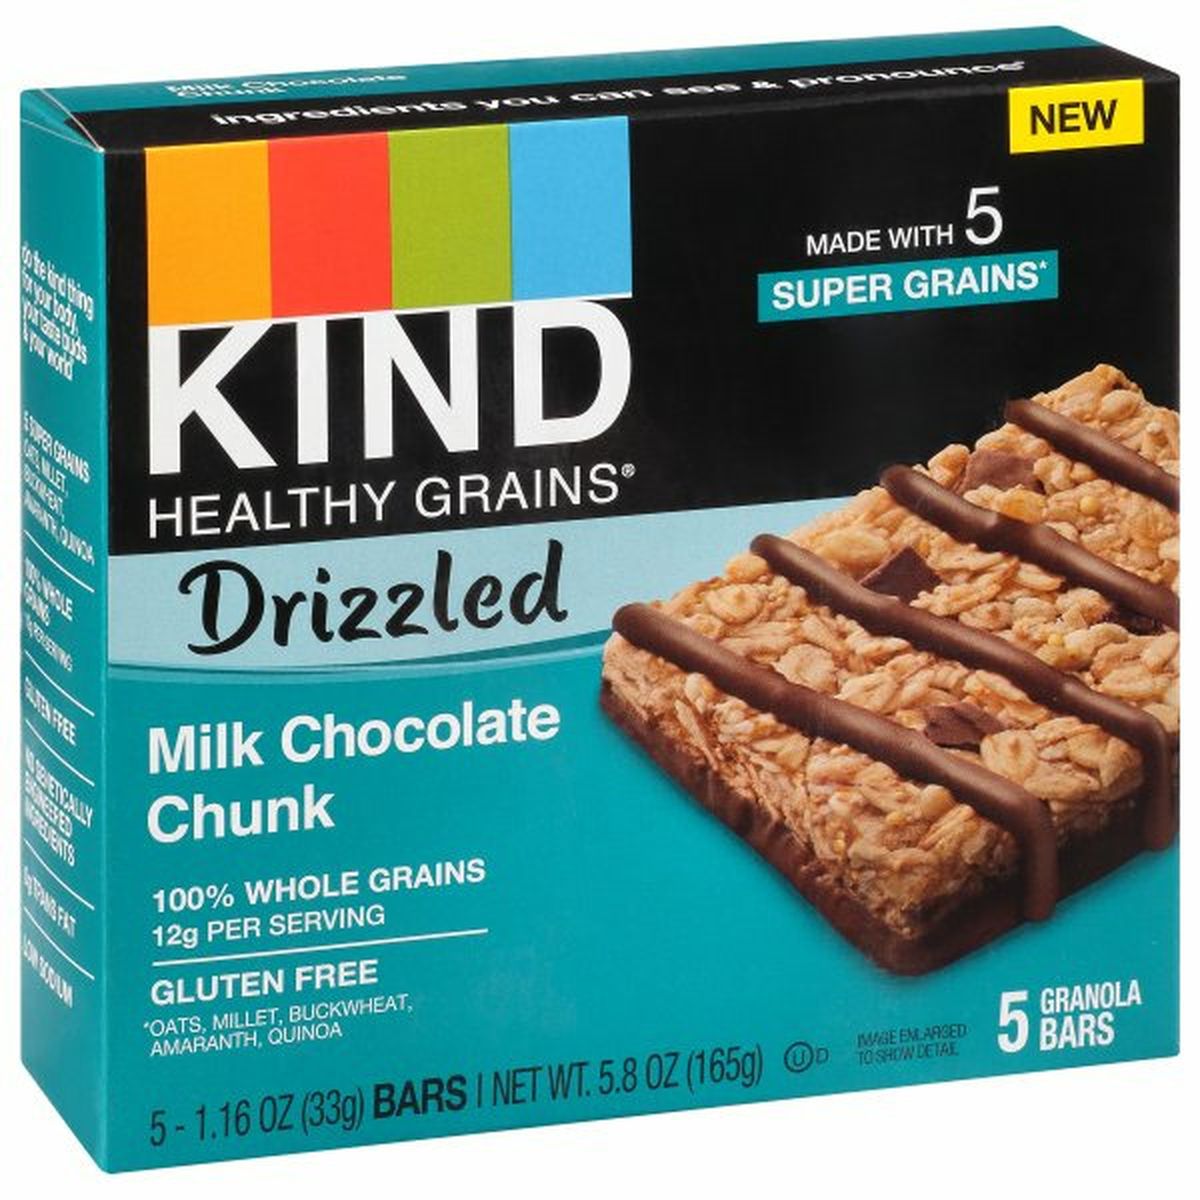 Calories in KIND Healthy Grains Granola Bars, Gluten Free, Drizzled, Milk Chocolate Chunk, 5 Pack